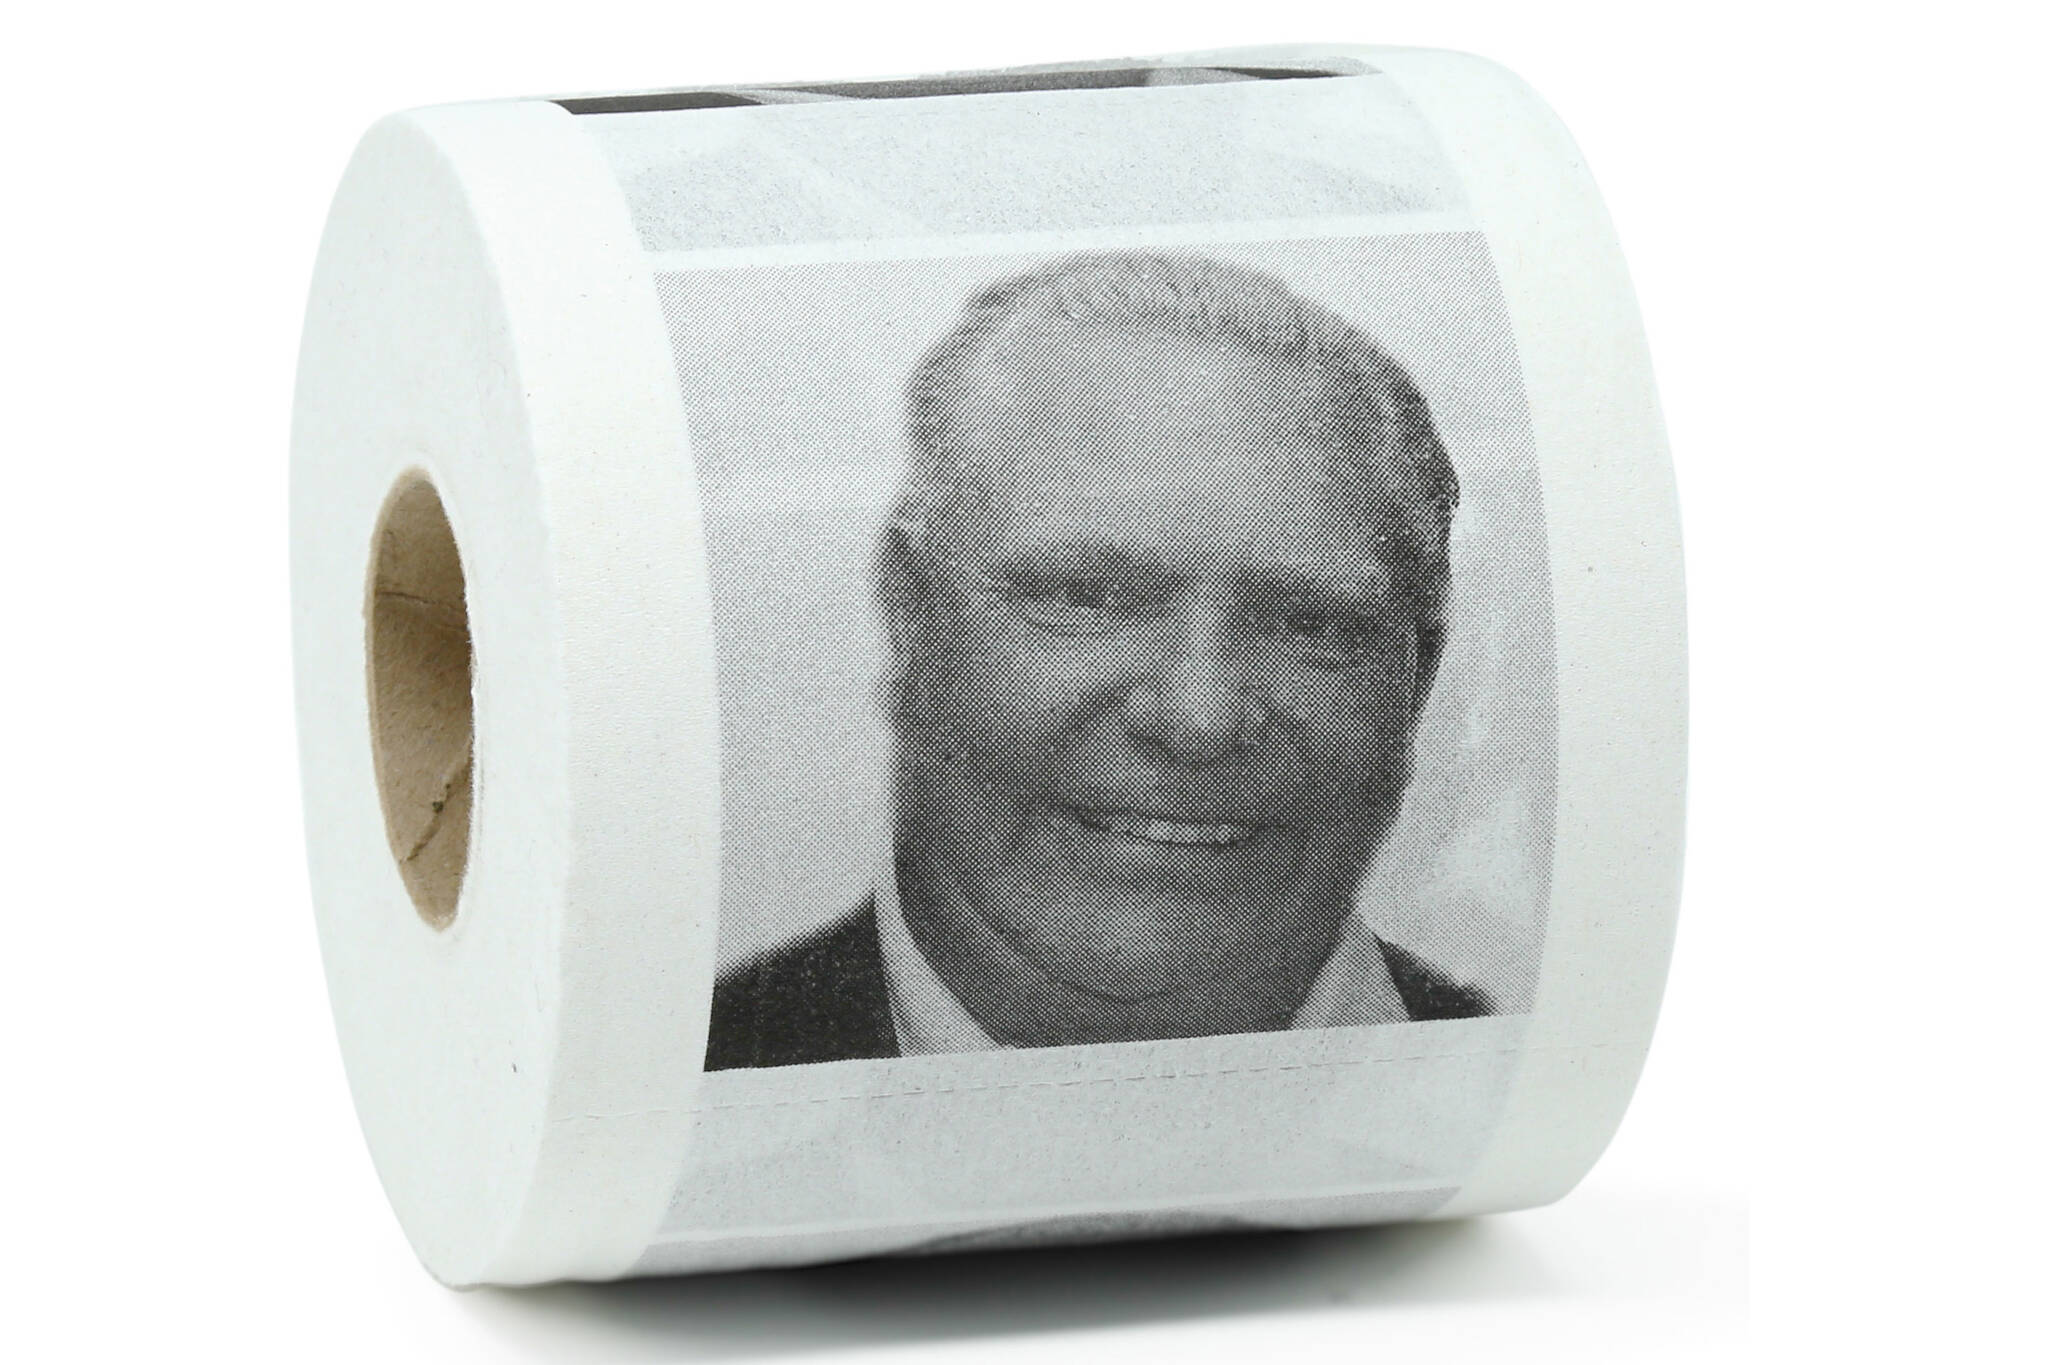 Stream Toilet Paper,Doo Doo Stain,Gucci Said by Toilet Paper